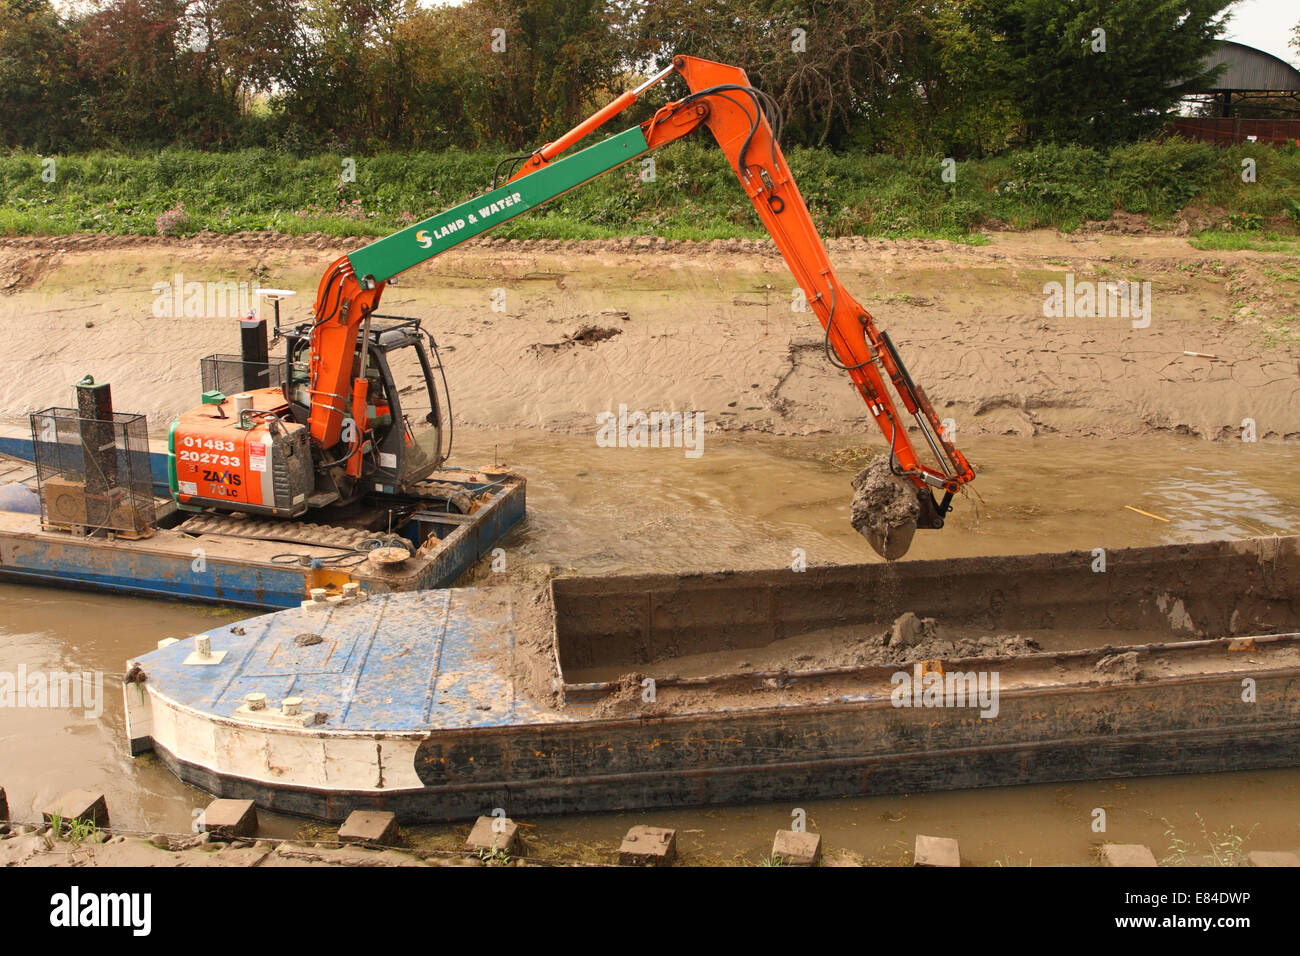 Burrowbridge, Somerset, UK. 30th September, 2014.  Dredging continues along the River Parrett on the Somerset Levels. Today a floating excavator takes river silt from mid channel of the Parrett and offloads it into a barge. The Environment Agency have so far dredged over 6km of river with a target of 8km by the end of October 2014. Stock Photo